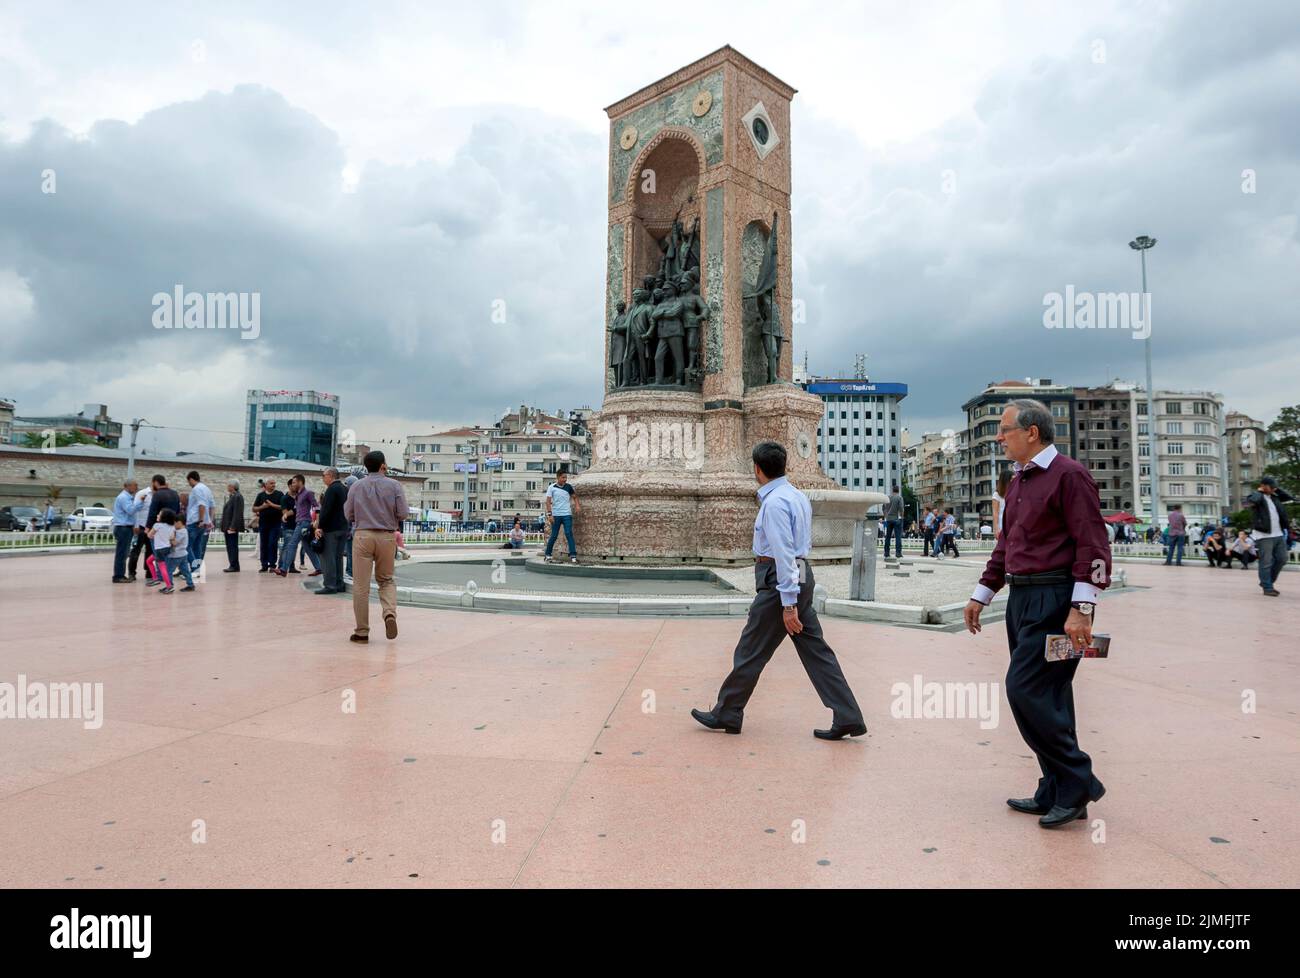 People gathered near the Republic Monument in Taksim Square at Istanbul in Turkey. It commemorates the formation of the Turkish Republic in 1923. Stock Photo